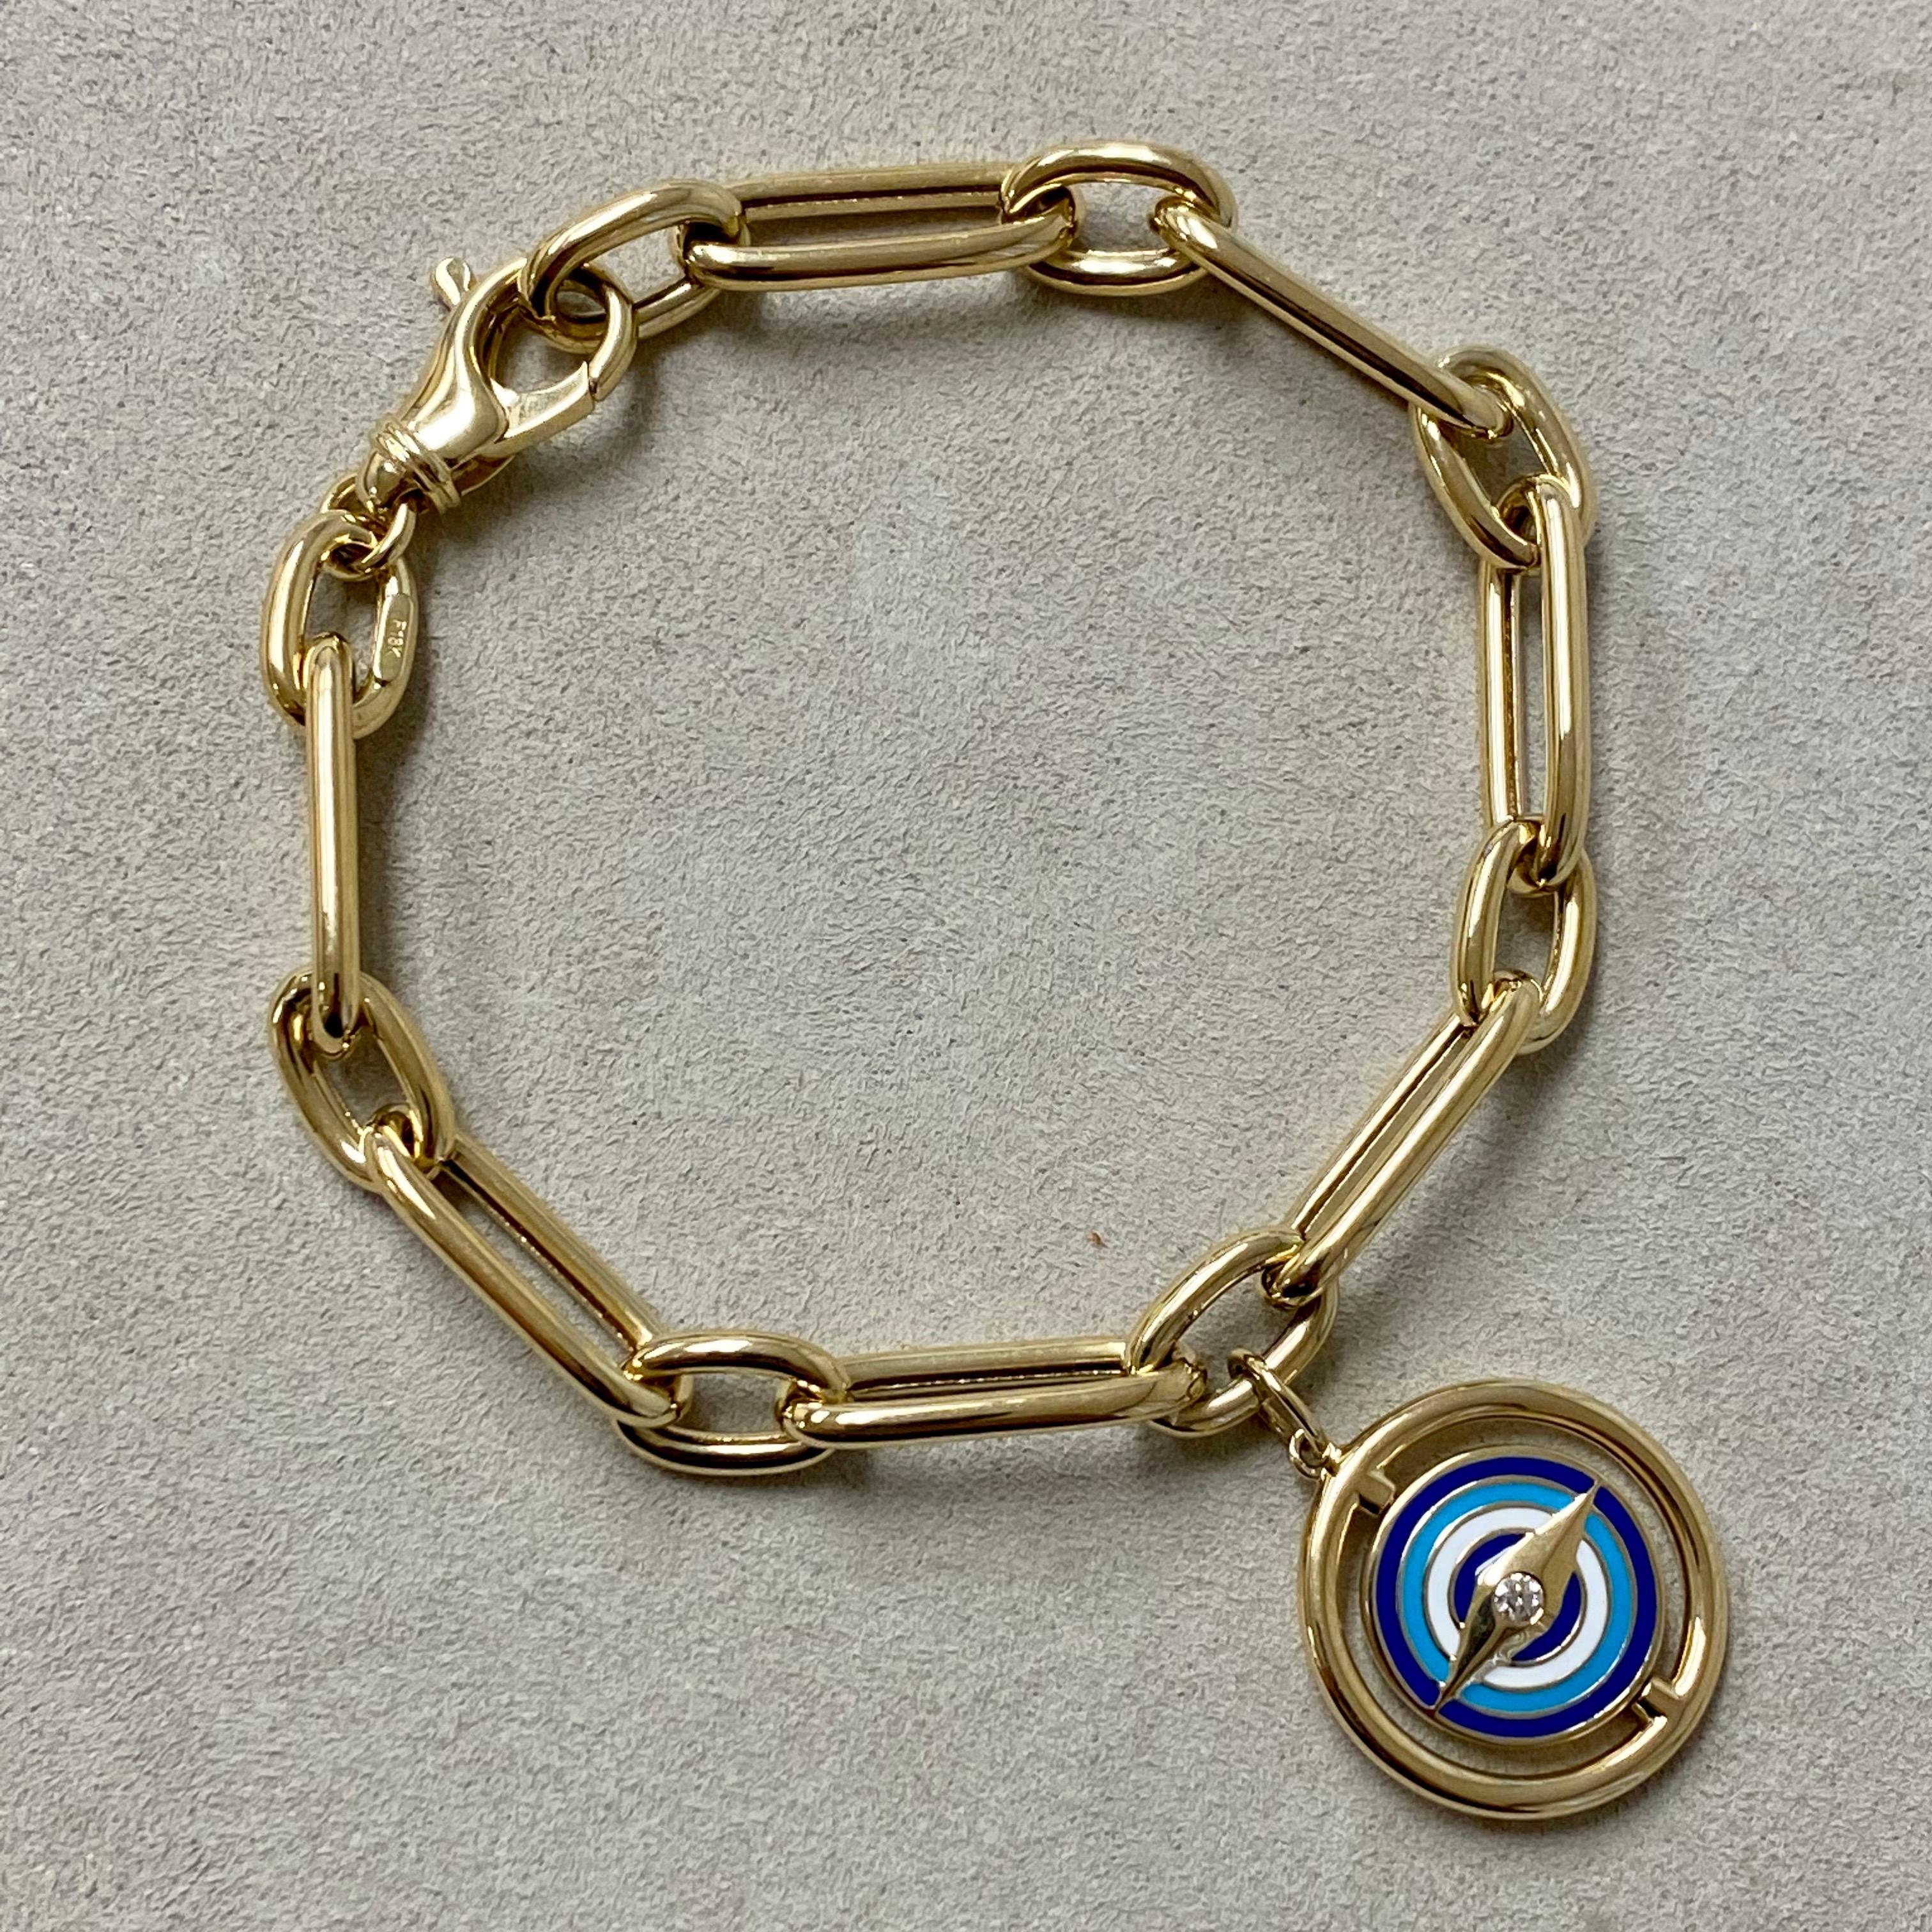 Created in 18 karat yellow gold
Lapis, Turquoise and White enamel details
Diamonds 0.12 carat approx.
8 inch length 
Swivel mechanism to turn the evil eye versions
18 karat yellow gold lobster clasp
Bracelet can be clasped at any length
Also